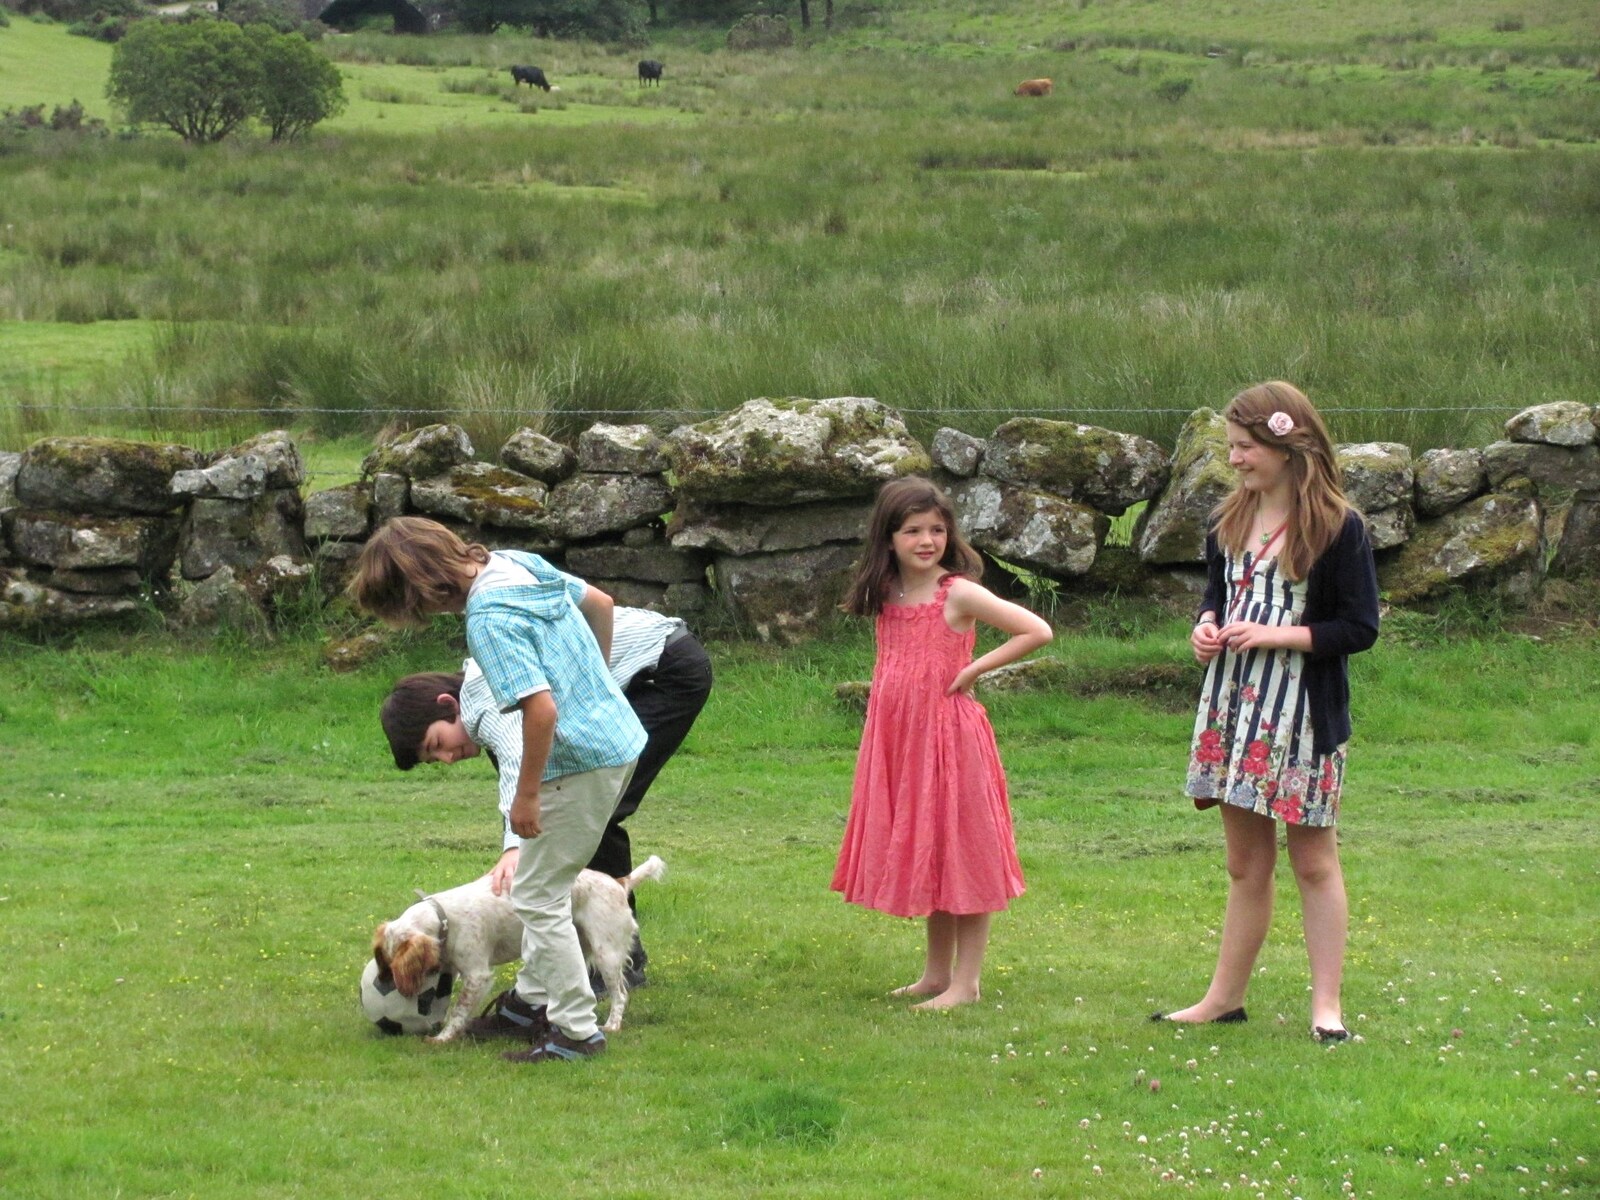 The dog eats the ball from Mike's Memorial, Prince Hall Hotel, Two Bridges, Dartmoor - 12th July 2011